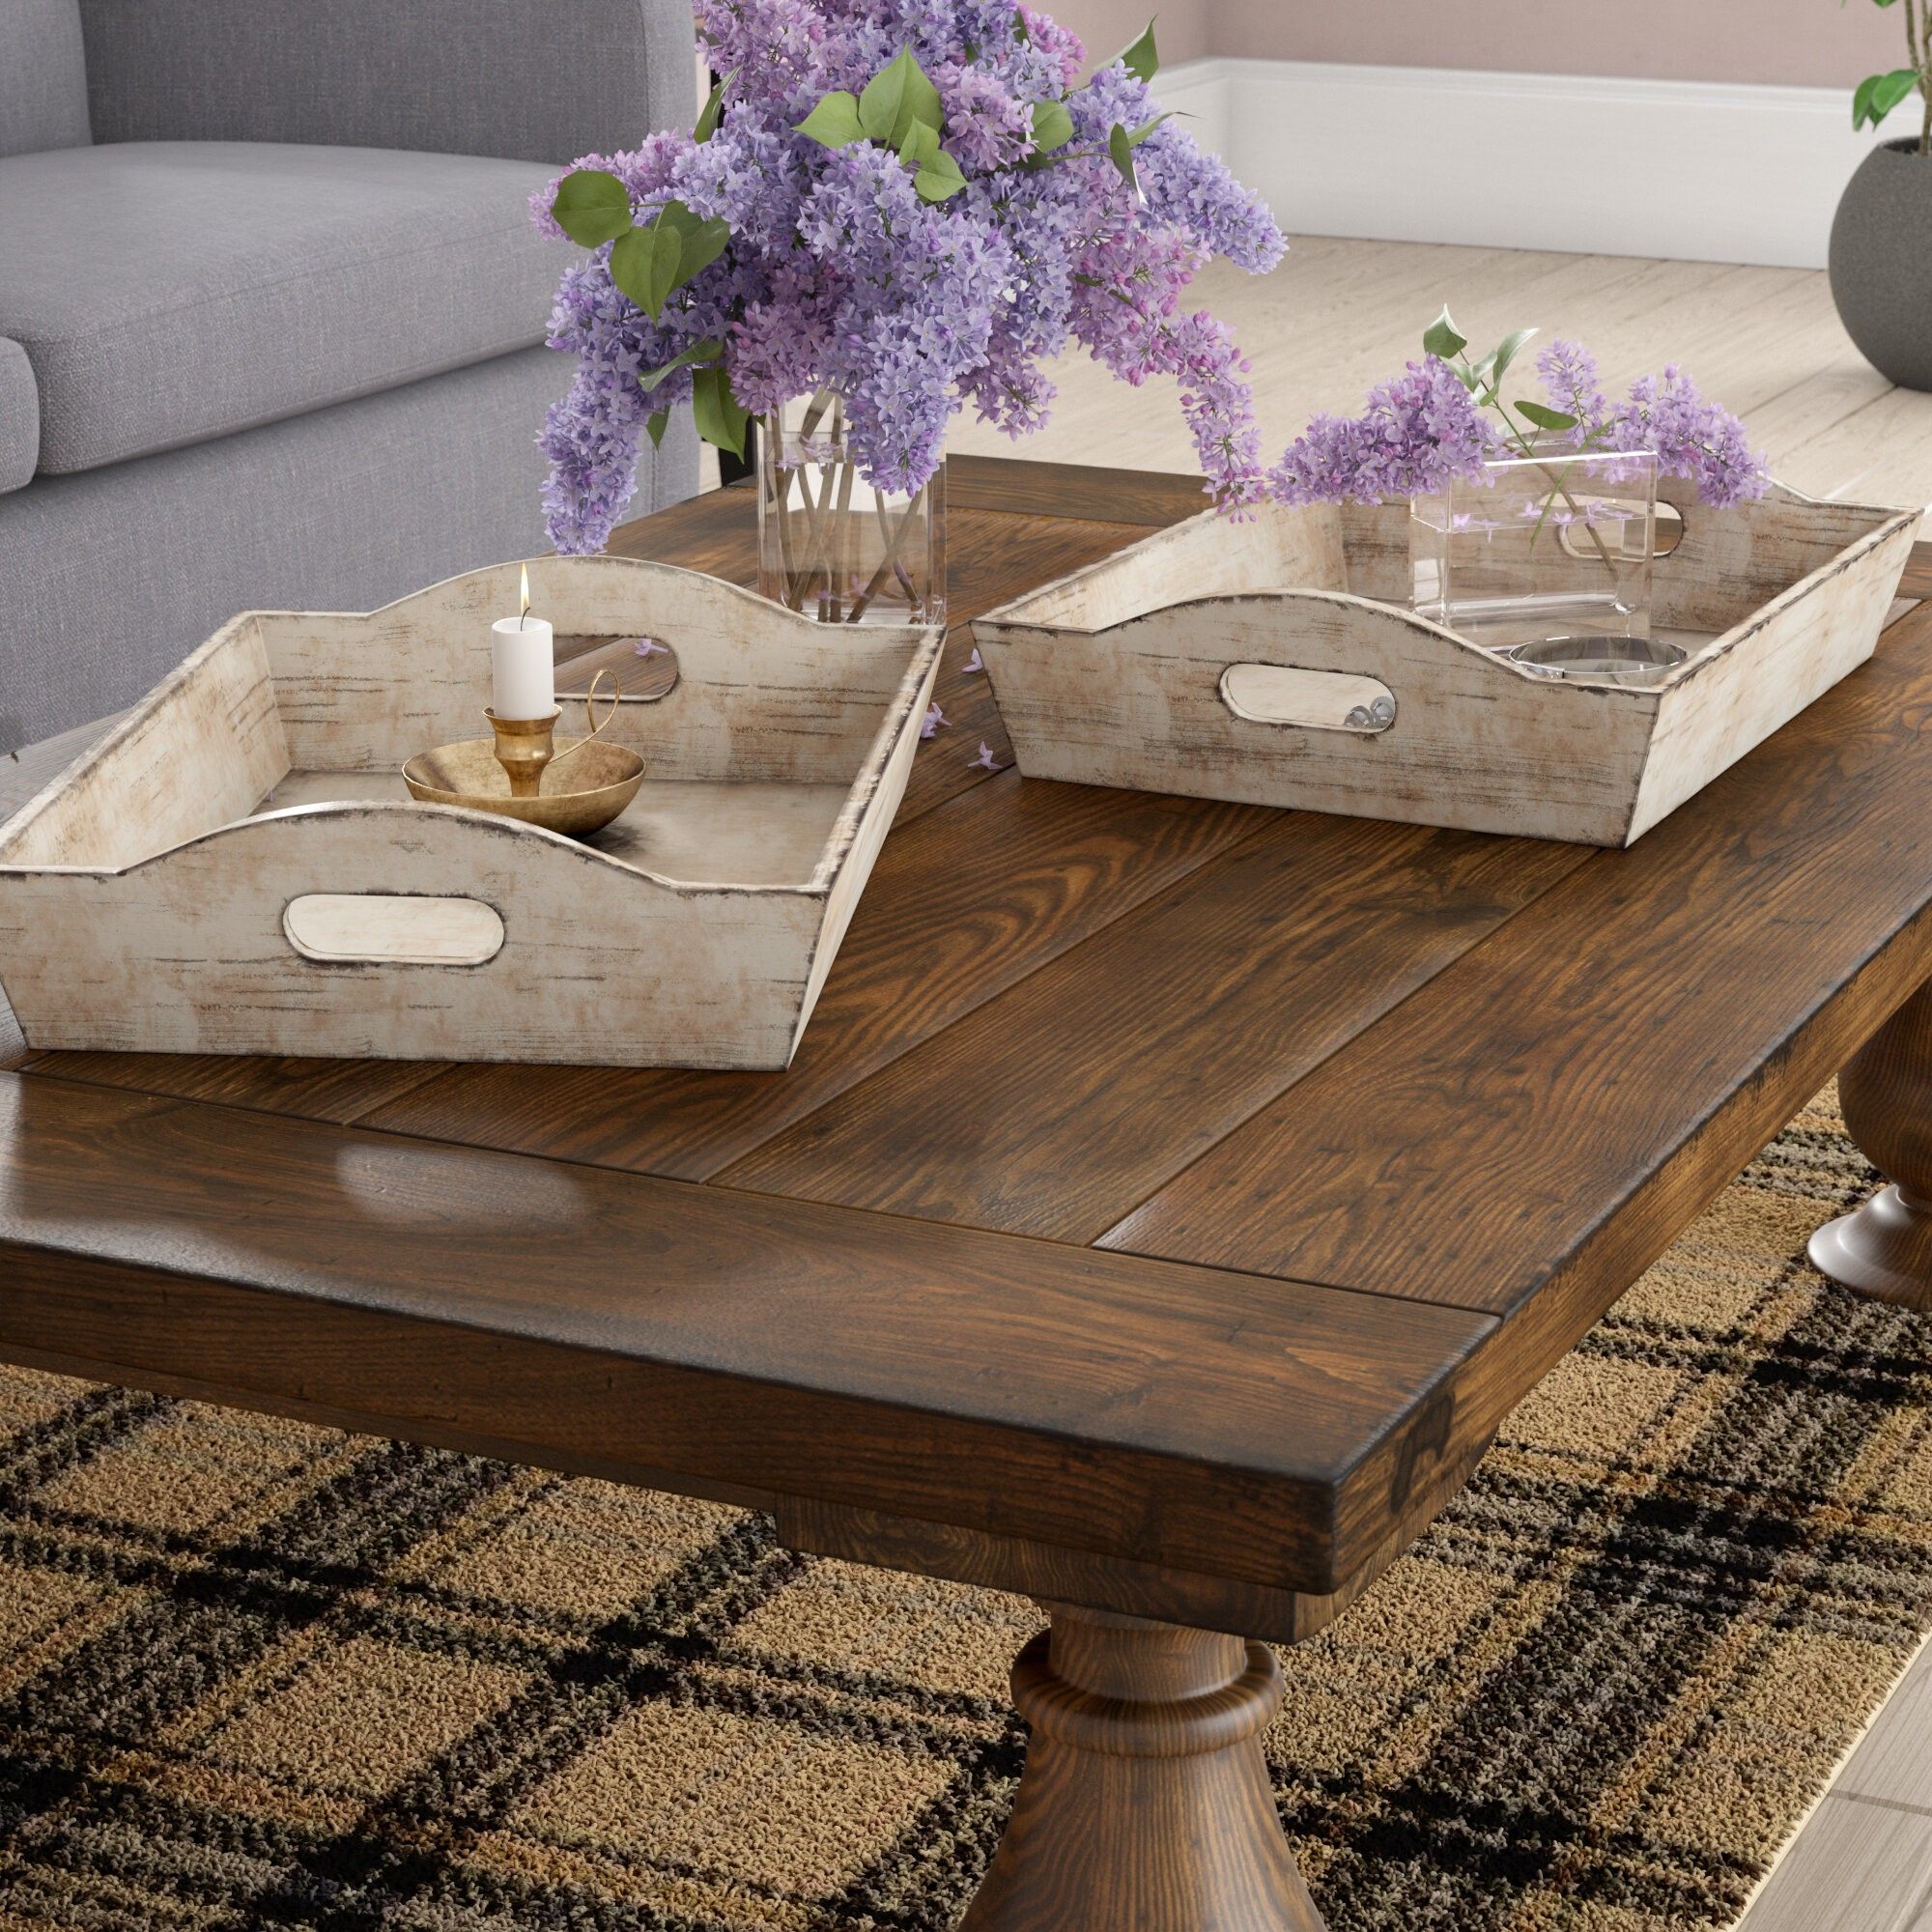 Decorative Trays For Coffee Tables / Lovely Decorative Tray Coffee With Coffee Tables With Trays (View 17 of 20)